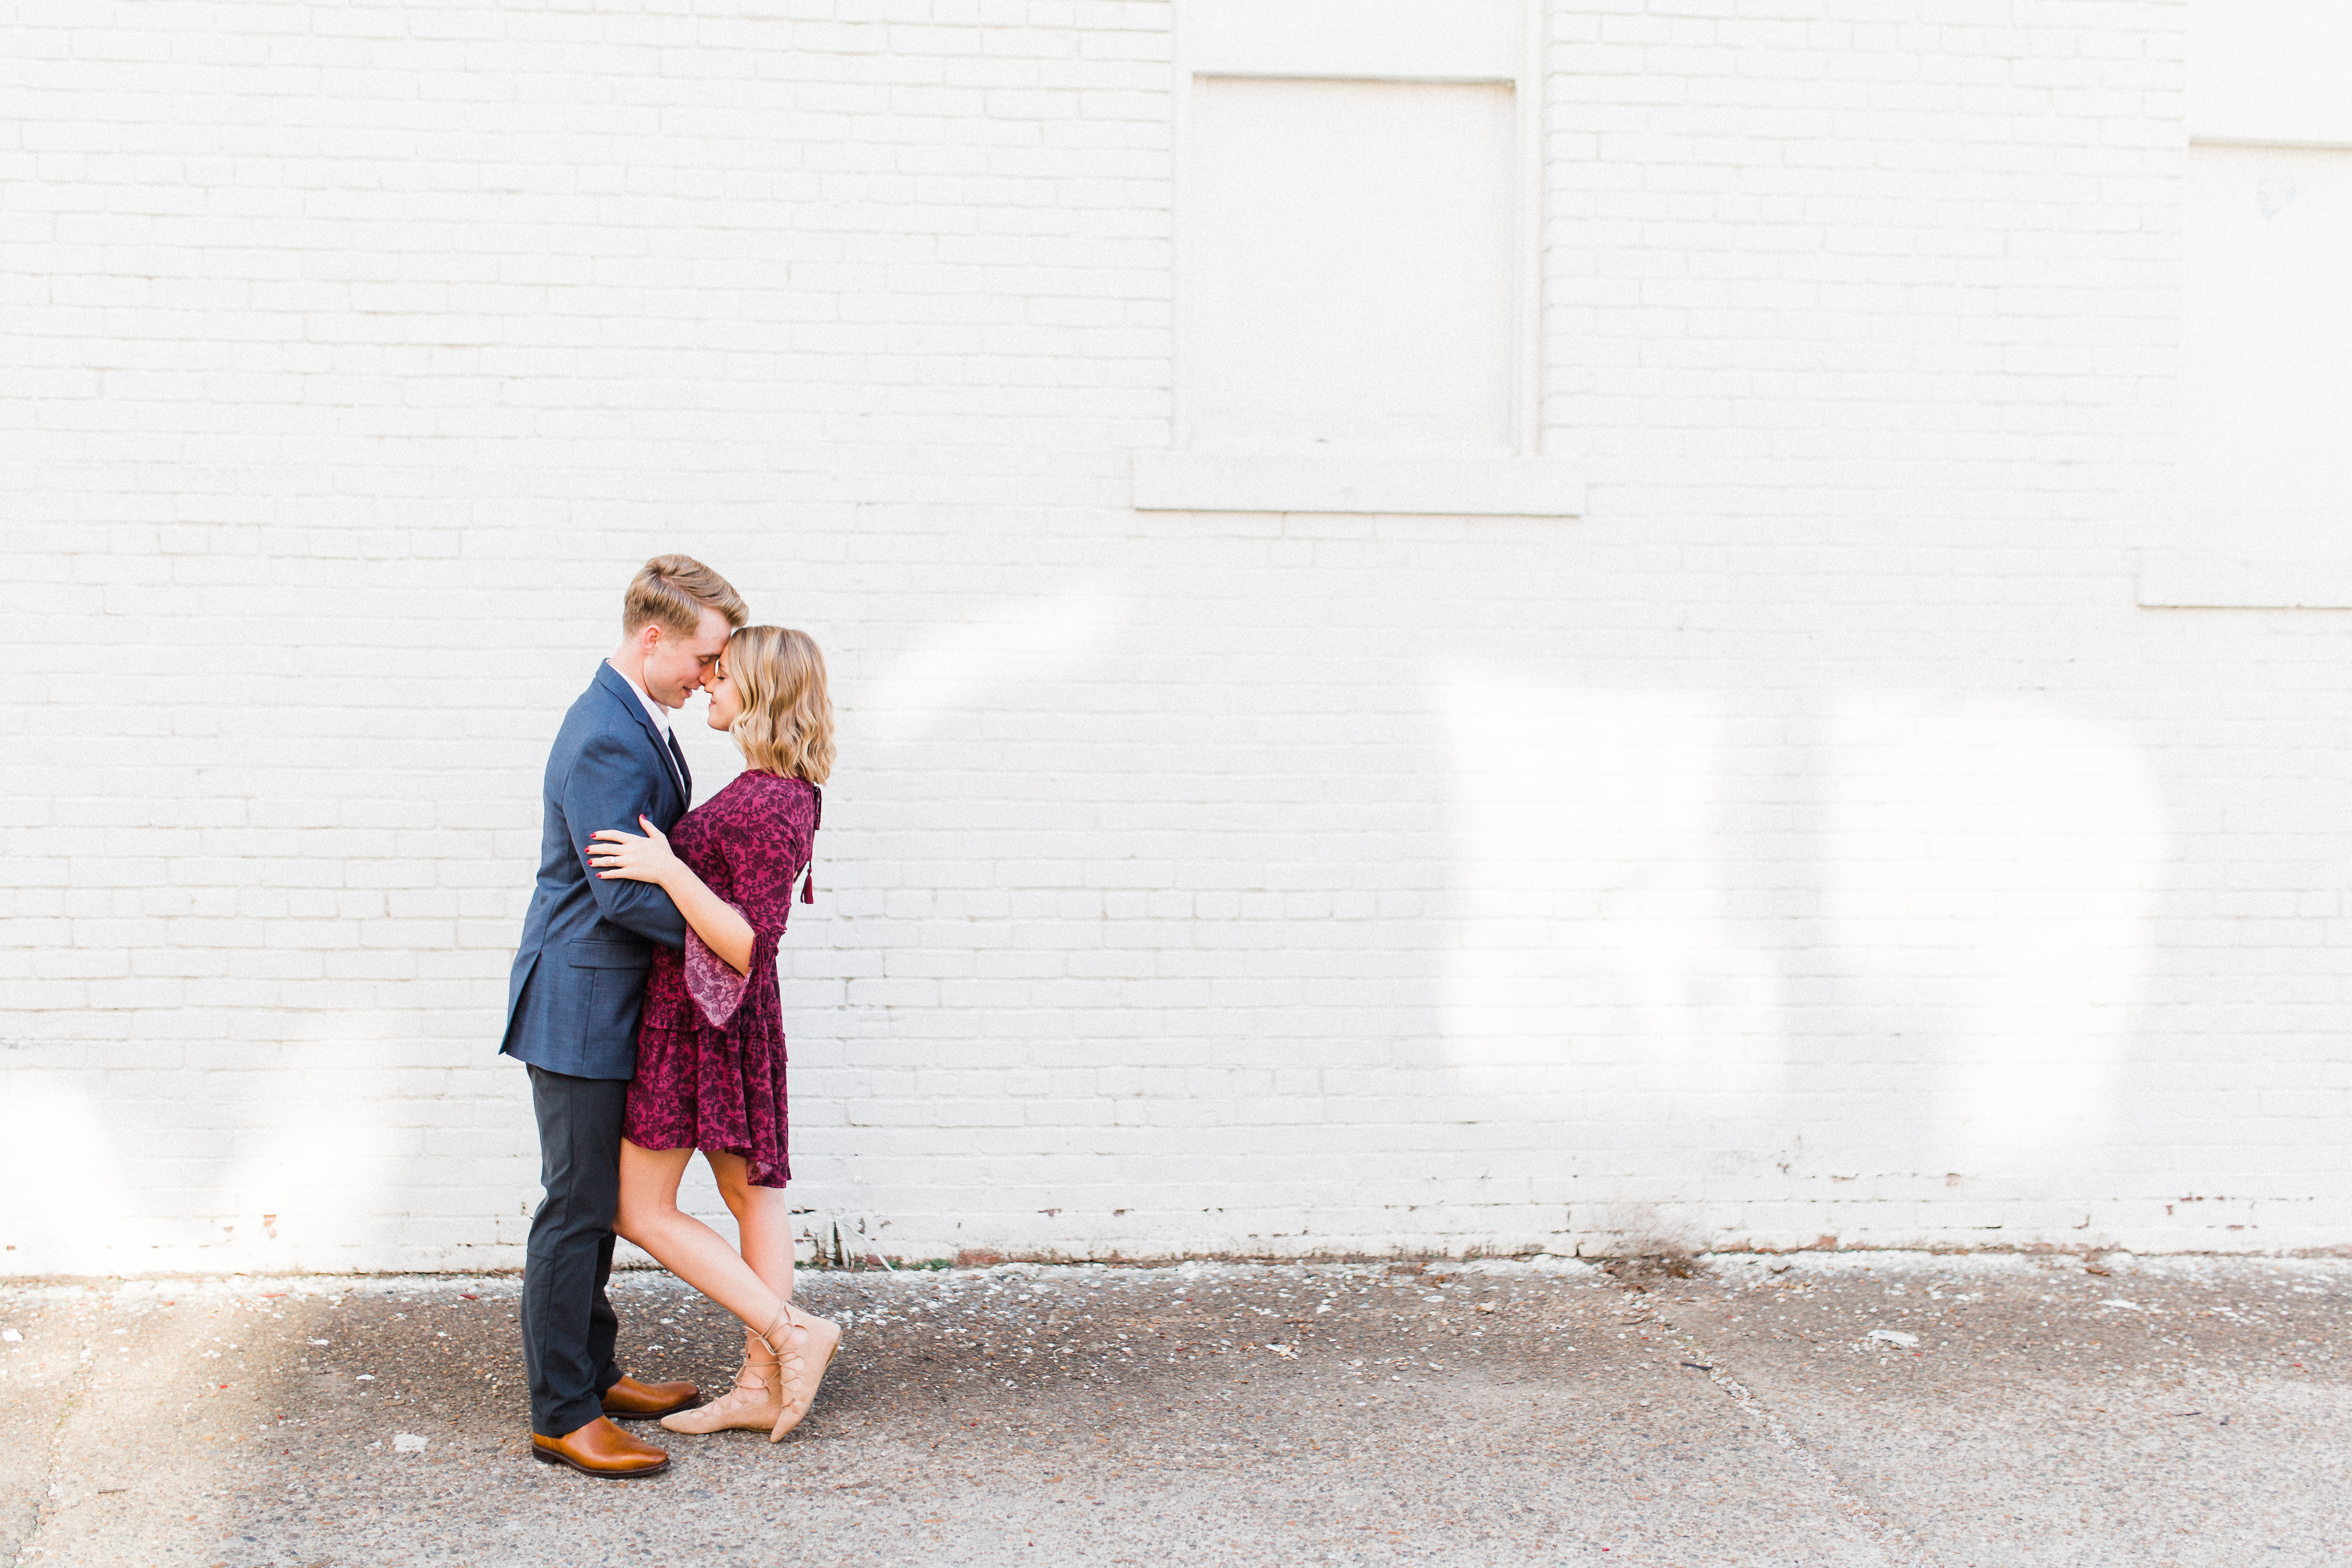 Urban engagement shoot in Downtown Evansville. Photographed by Morgan Williams Photography.